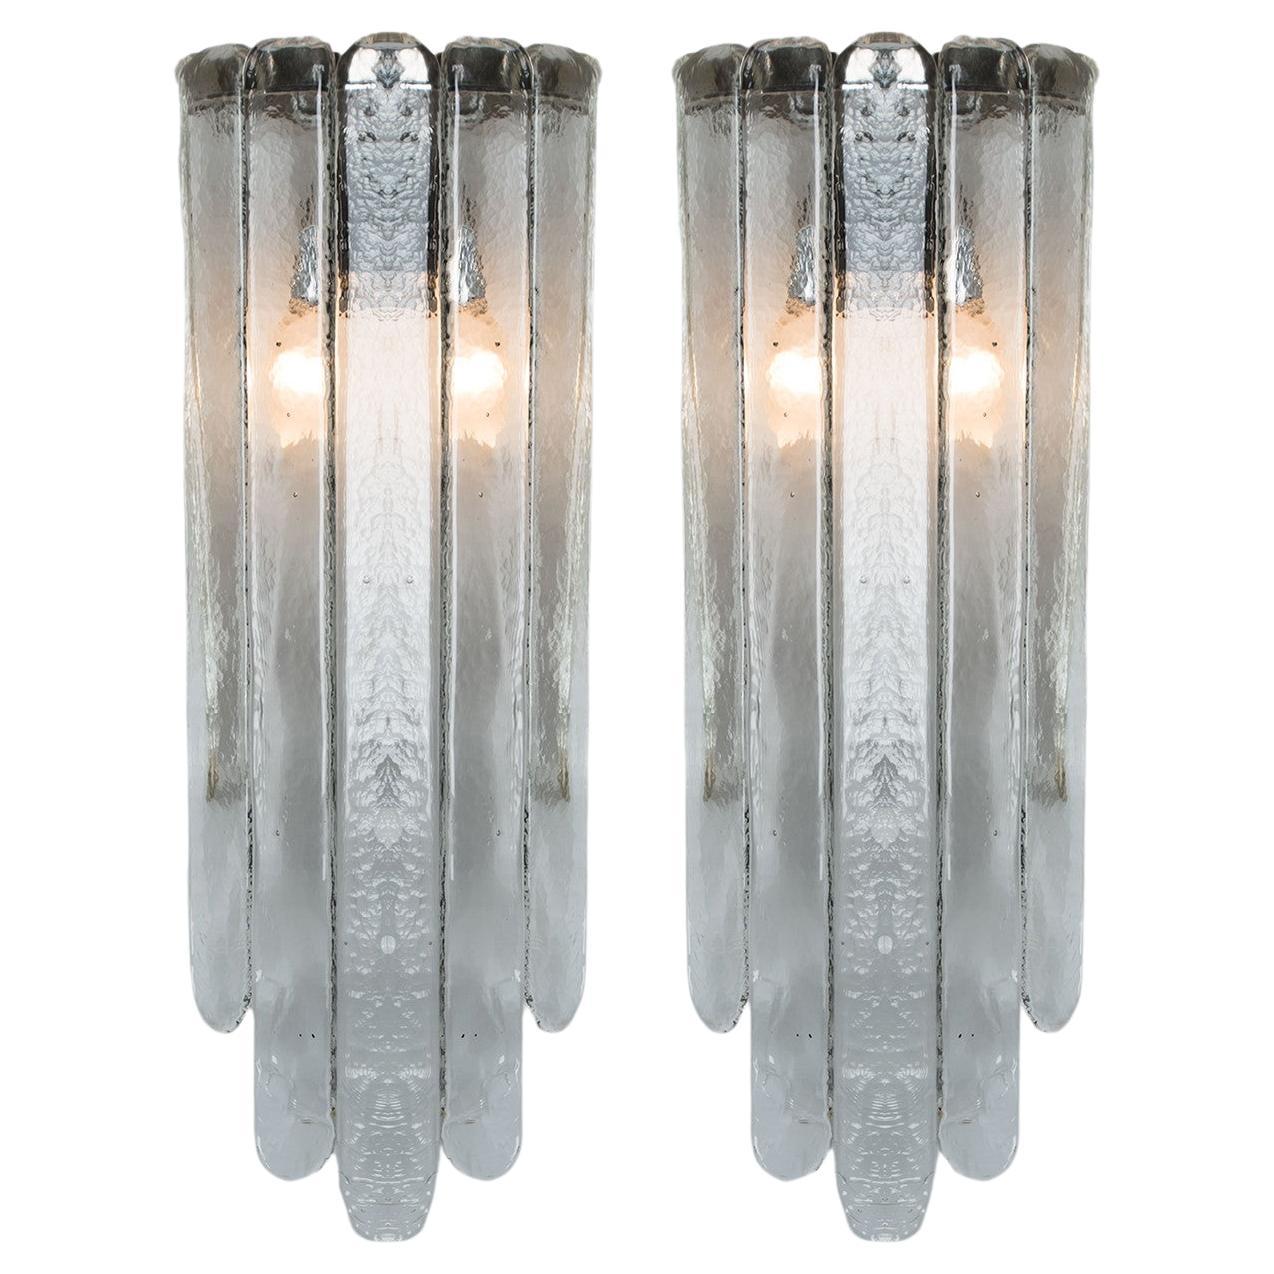 Pair of Long Clear Wall Lights, Mazzega, 1970s